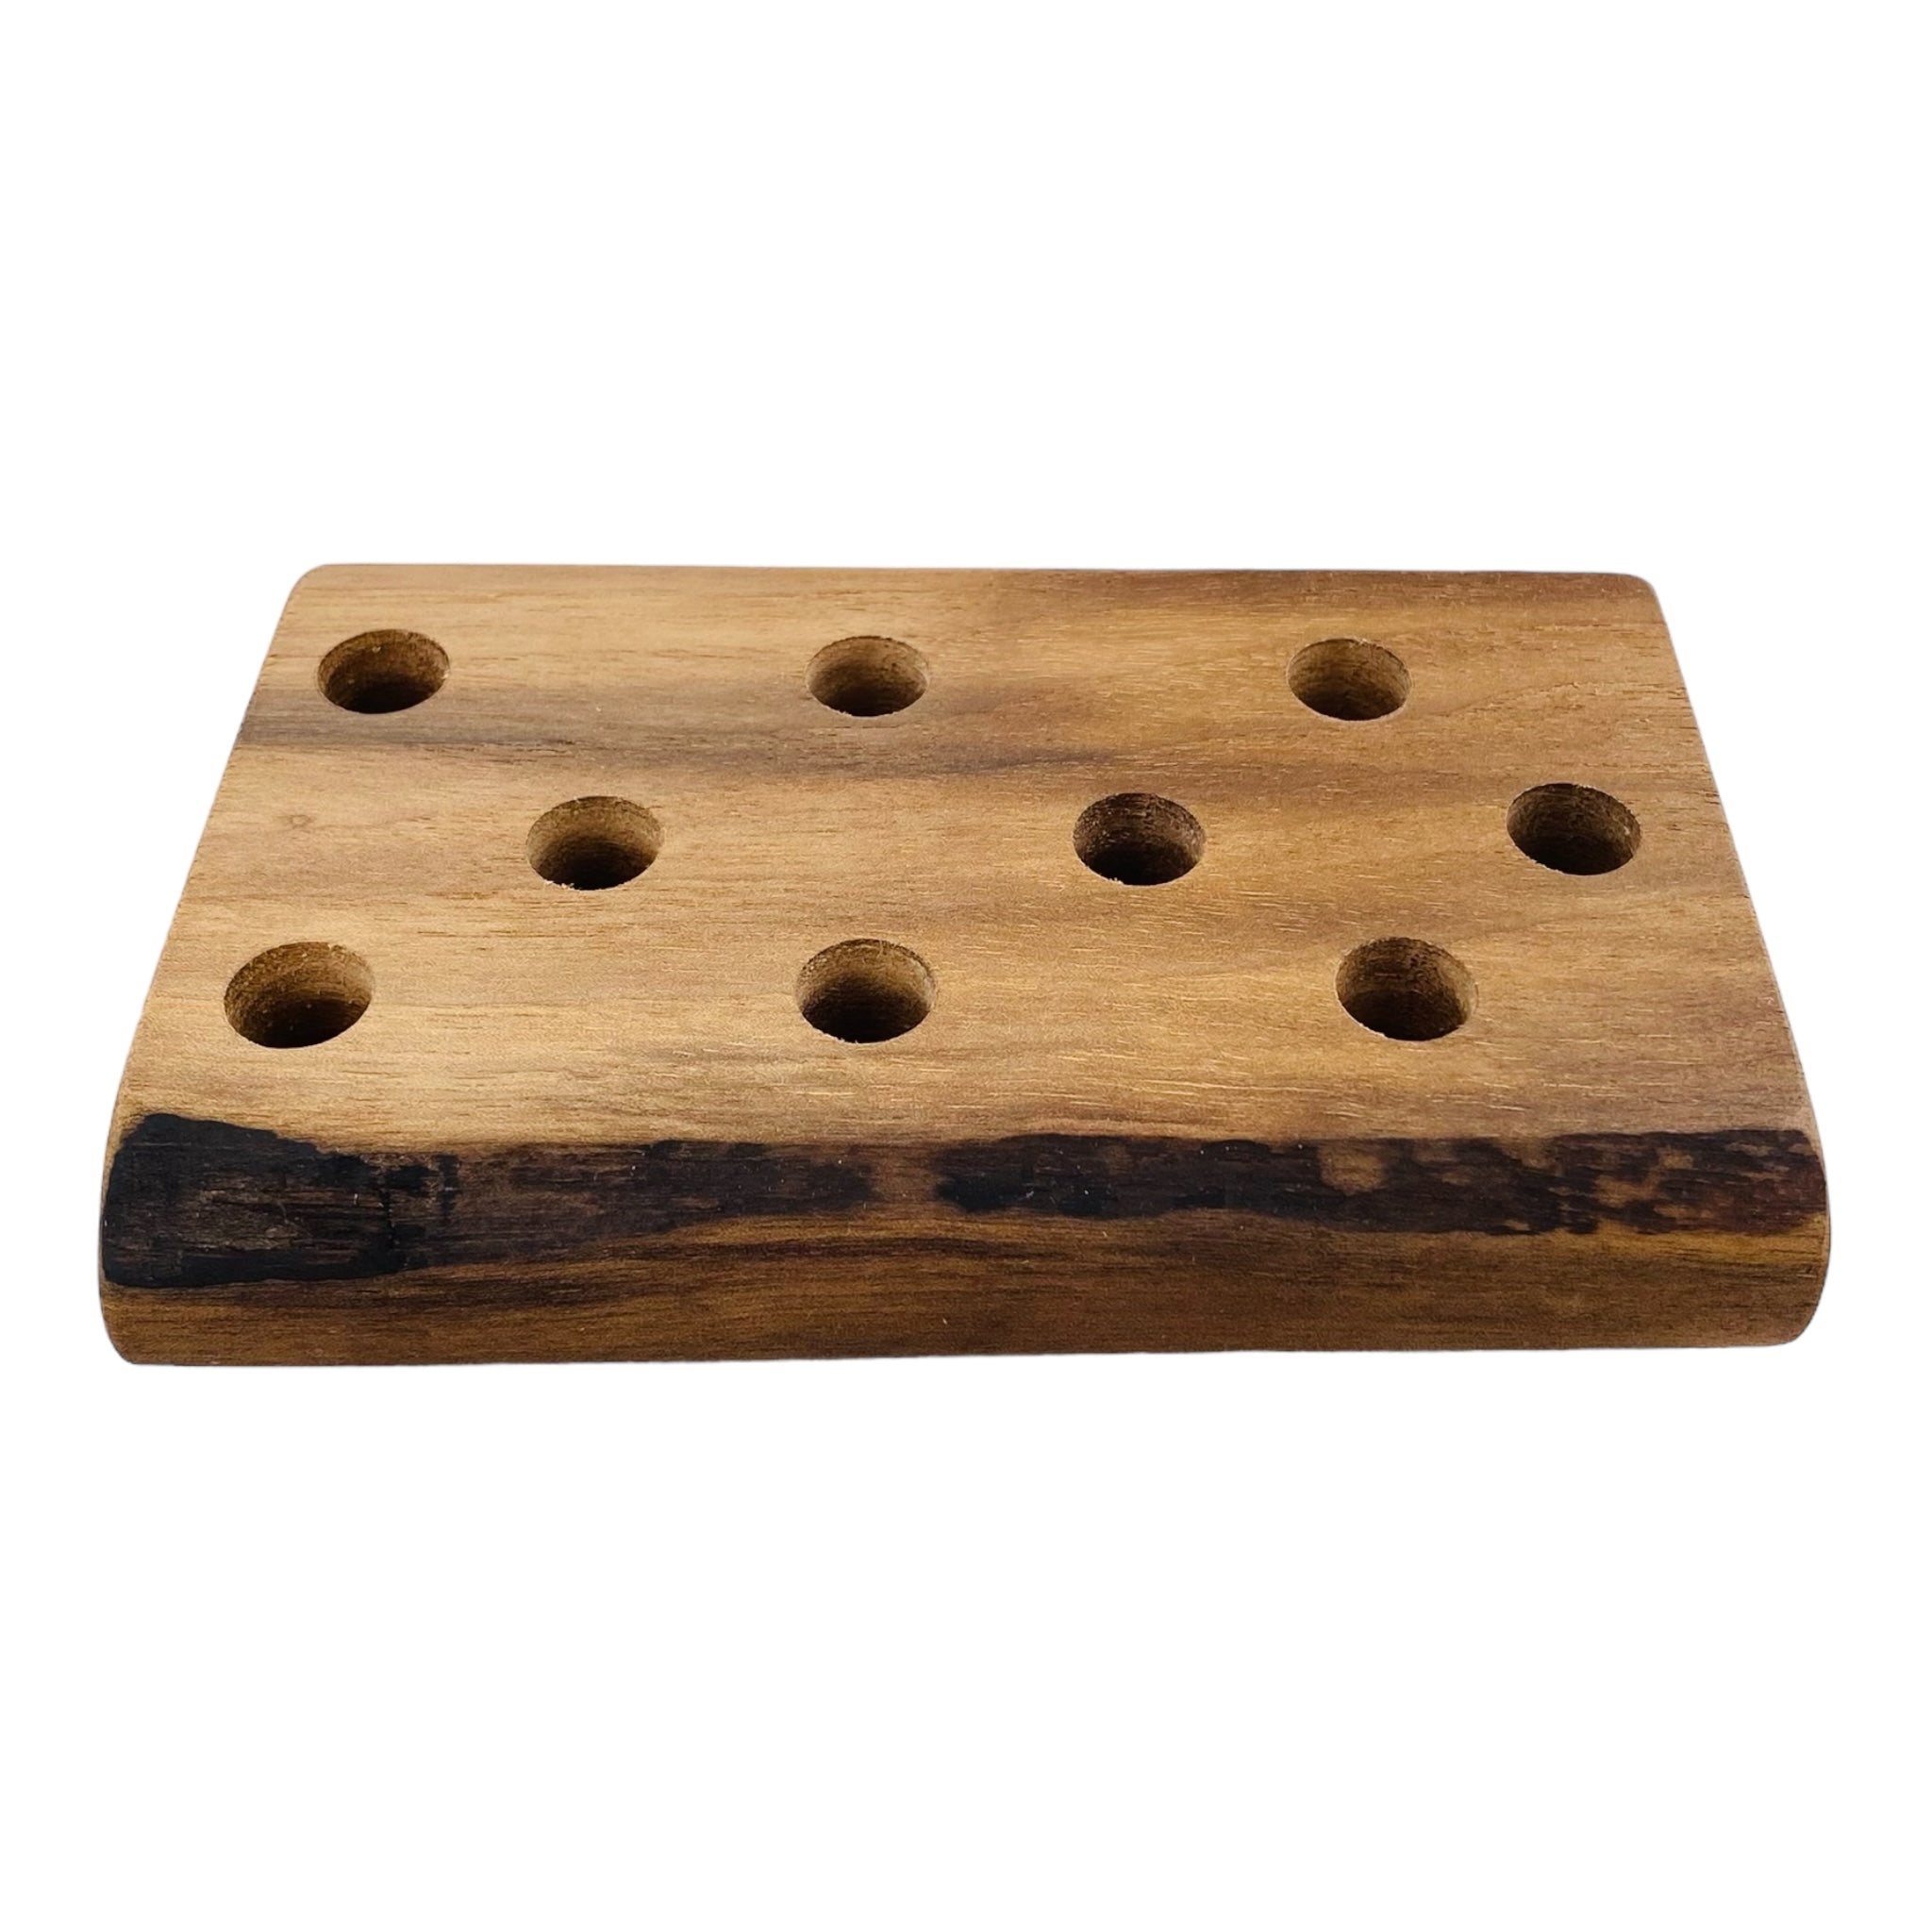 9 Hole Wood Display Stand Holder For 14mm Bong Bowl Pieces Or Quartz Bangers - Black Walnut